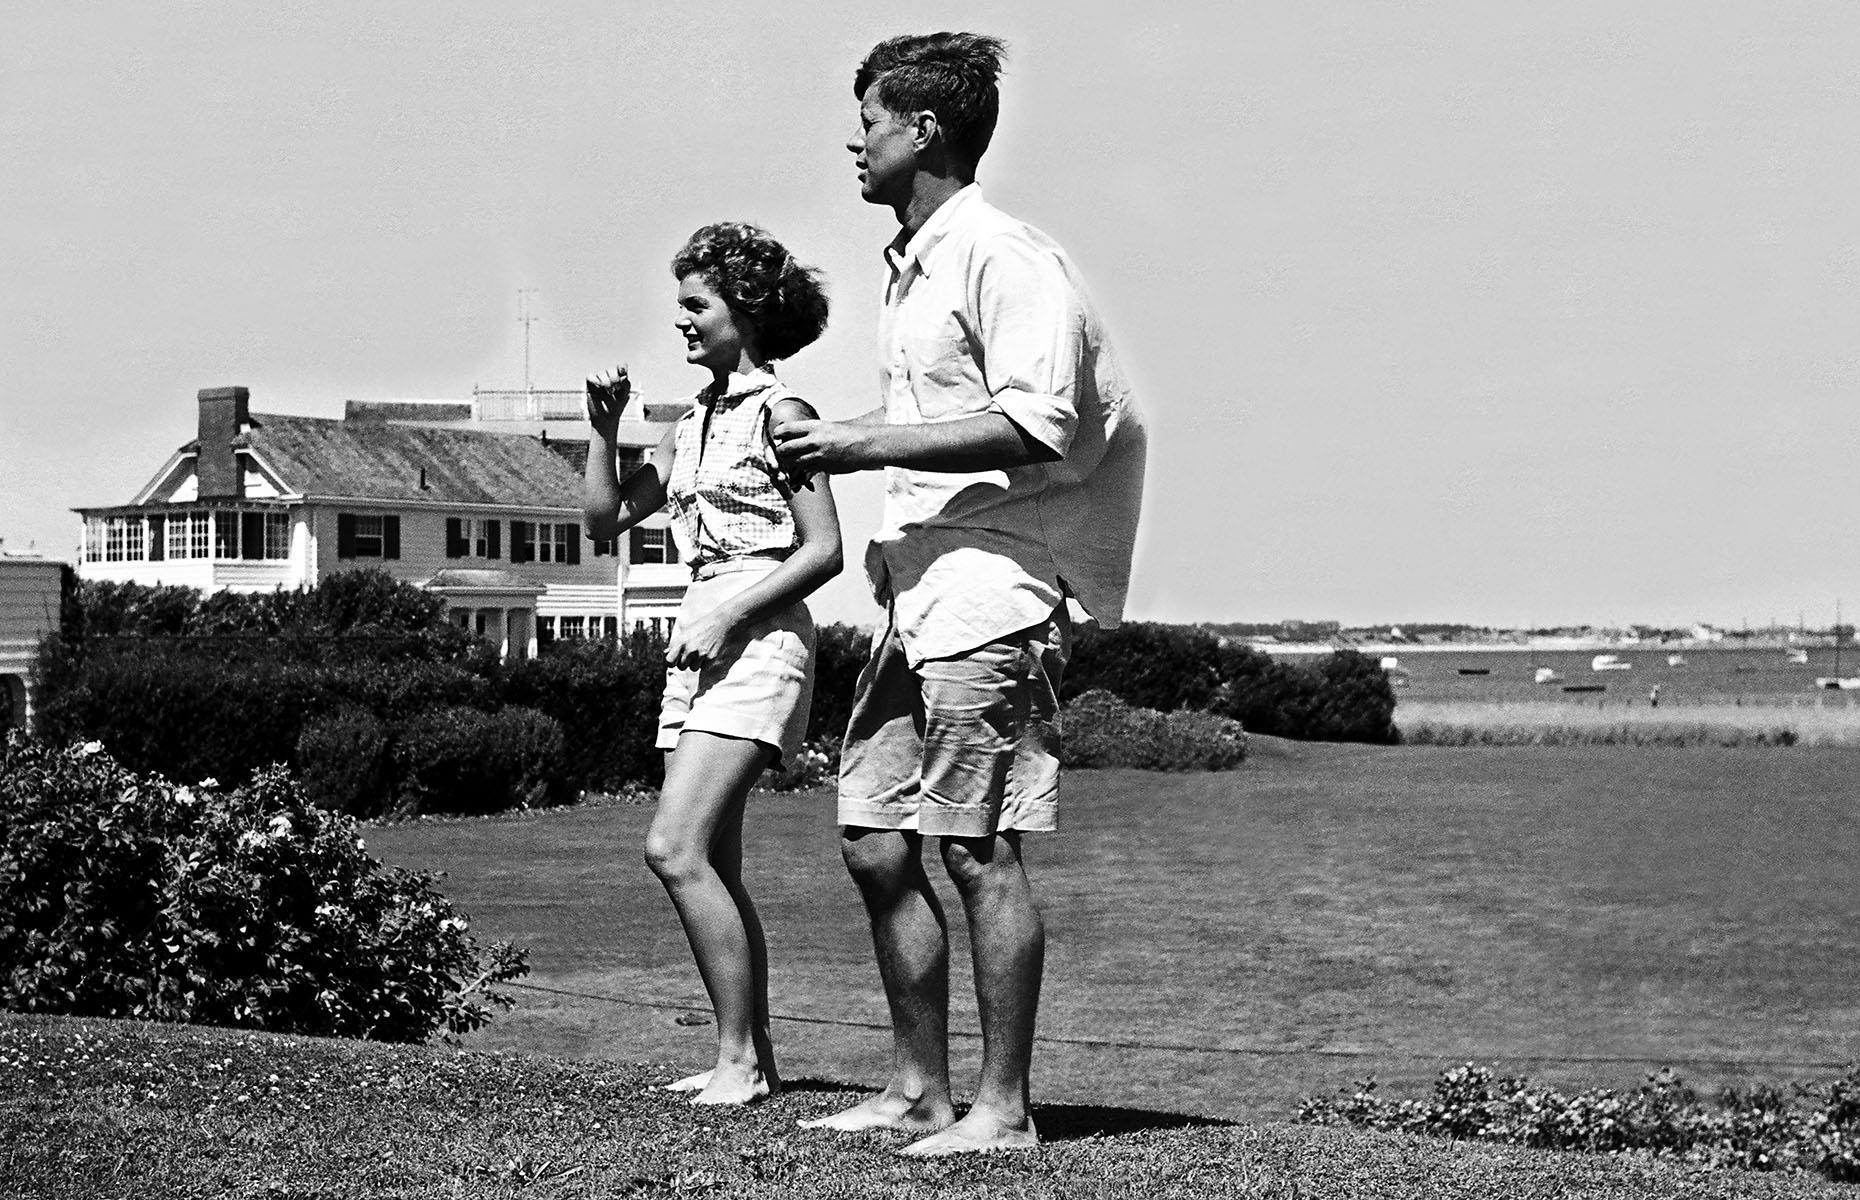 <p>If JFK's holiday home in Palm Beach was the Winter White House, his family's compound in Hyannis Port, Cape Cod was certainly the Summer White House. Kennedy's parents, Joseph P. and Rose, bought a cottage on the beach in the 1920s and JFK spent his summers there along with his siblings. </p>  <p>Over the years, the Massachusetts estate expanded to encompass six acres and three houses. JFK is pictured here at the Kennedy compound with his then-fiancée Jacqueline Bouvier in June 1953. </p>